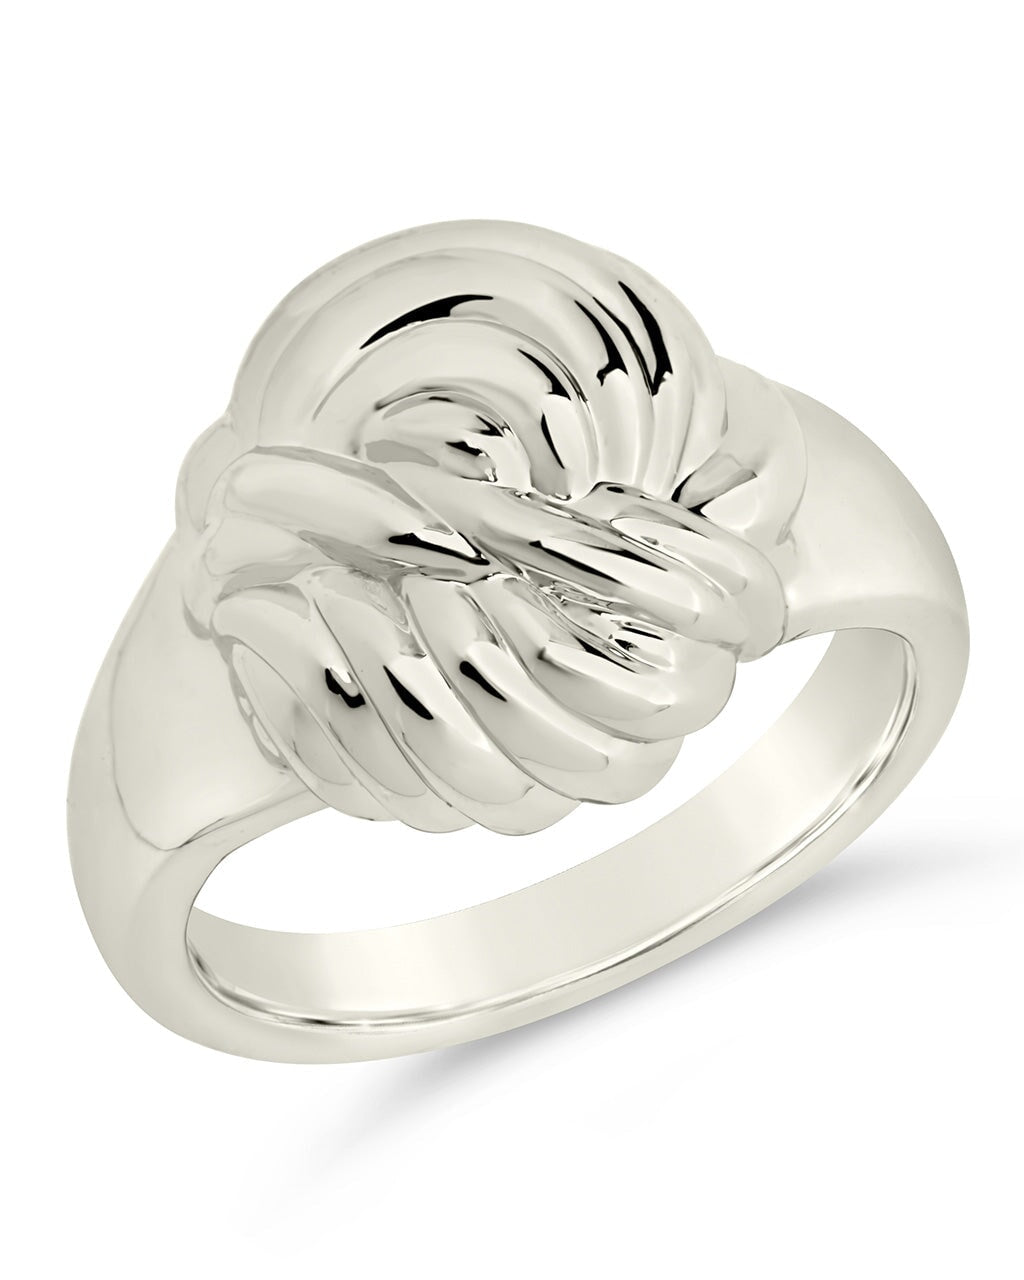 Brioche Twist Ring Ring Sterling Forever Silver 6 